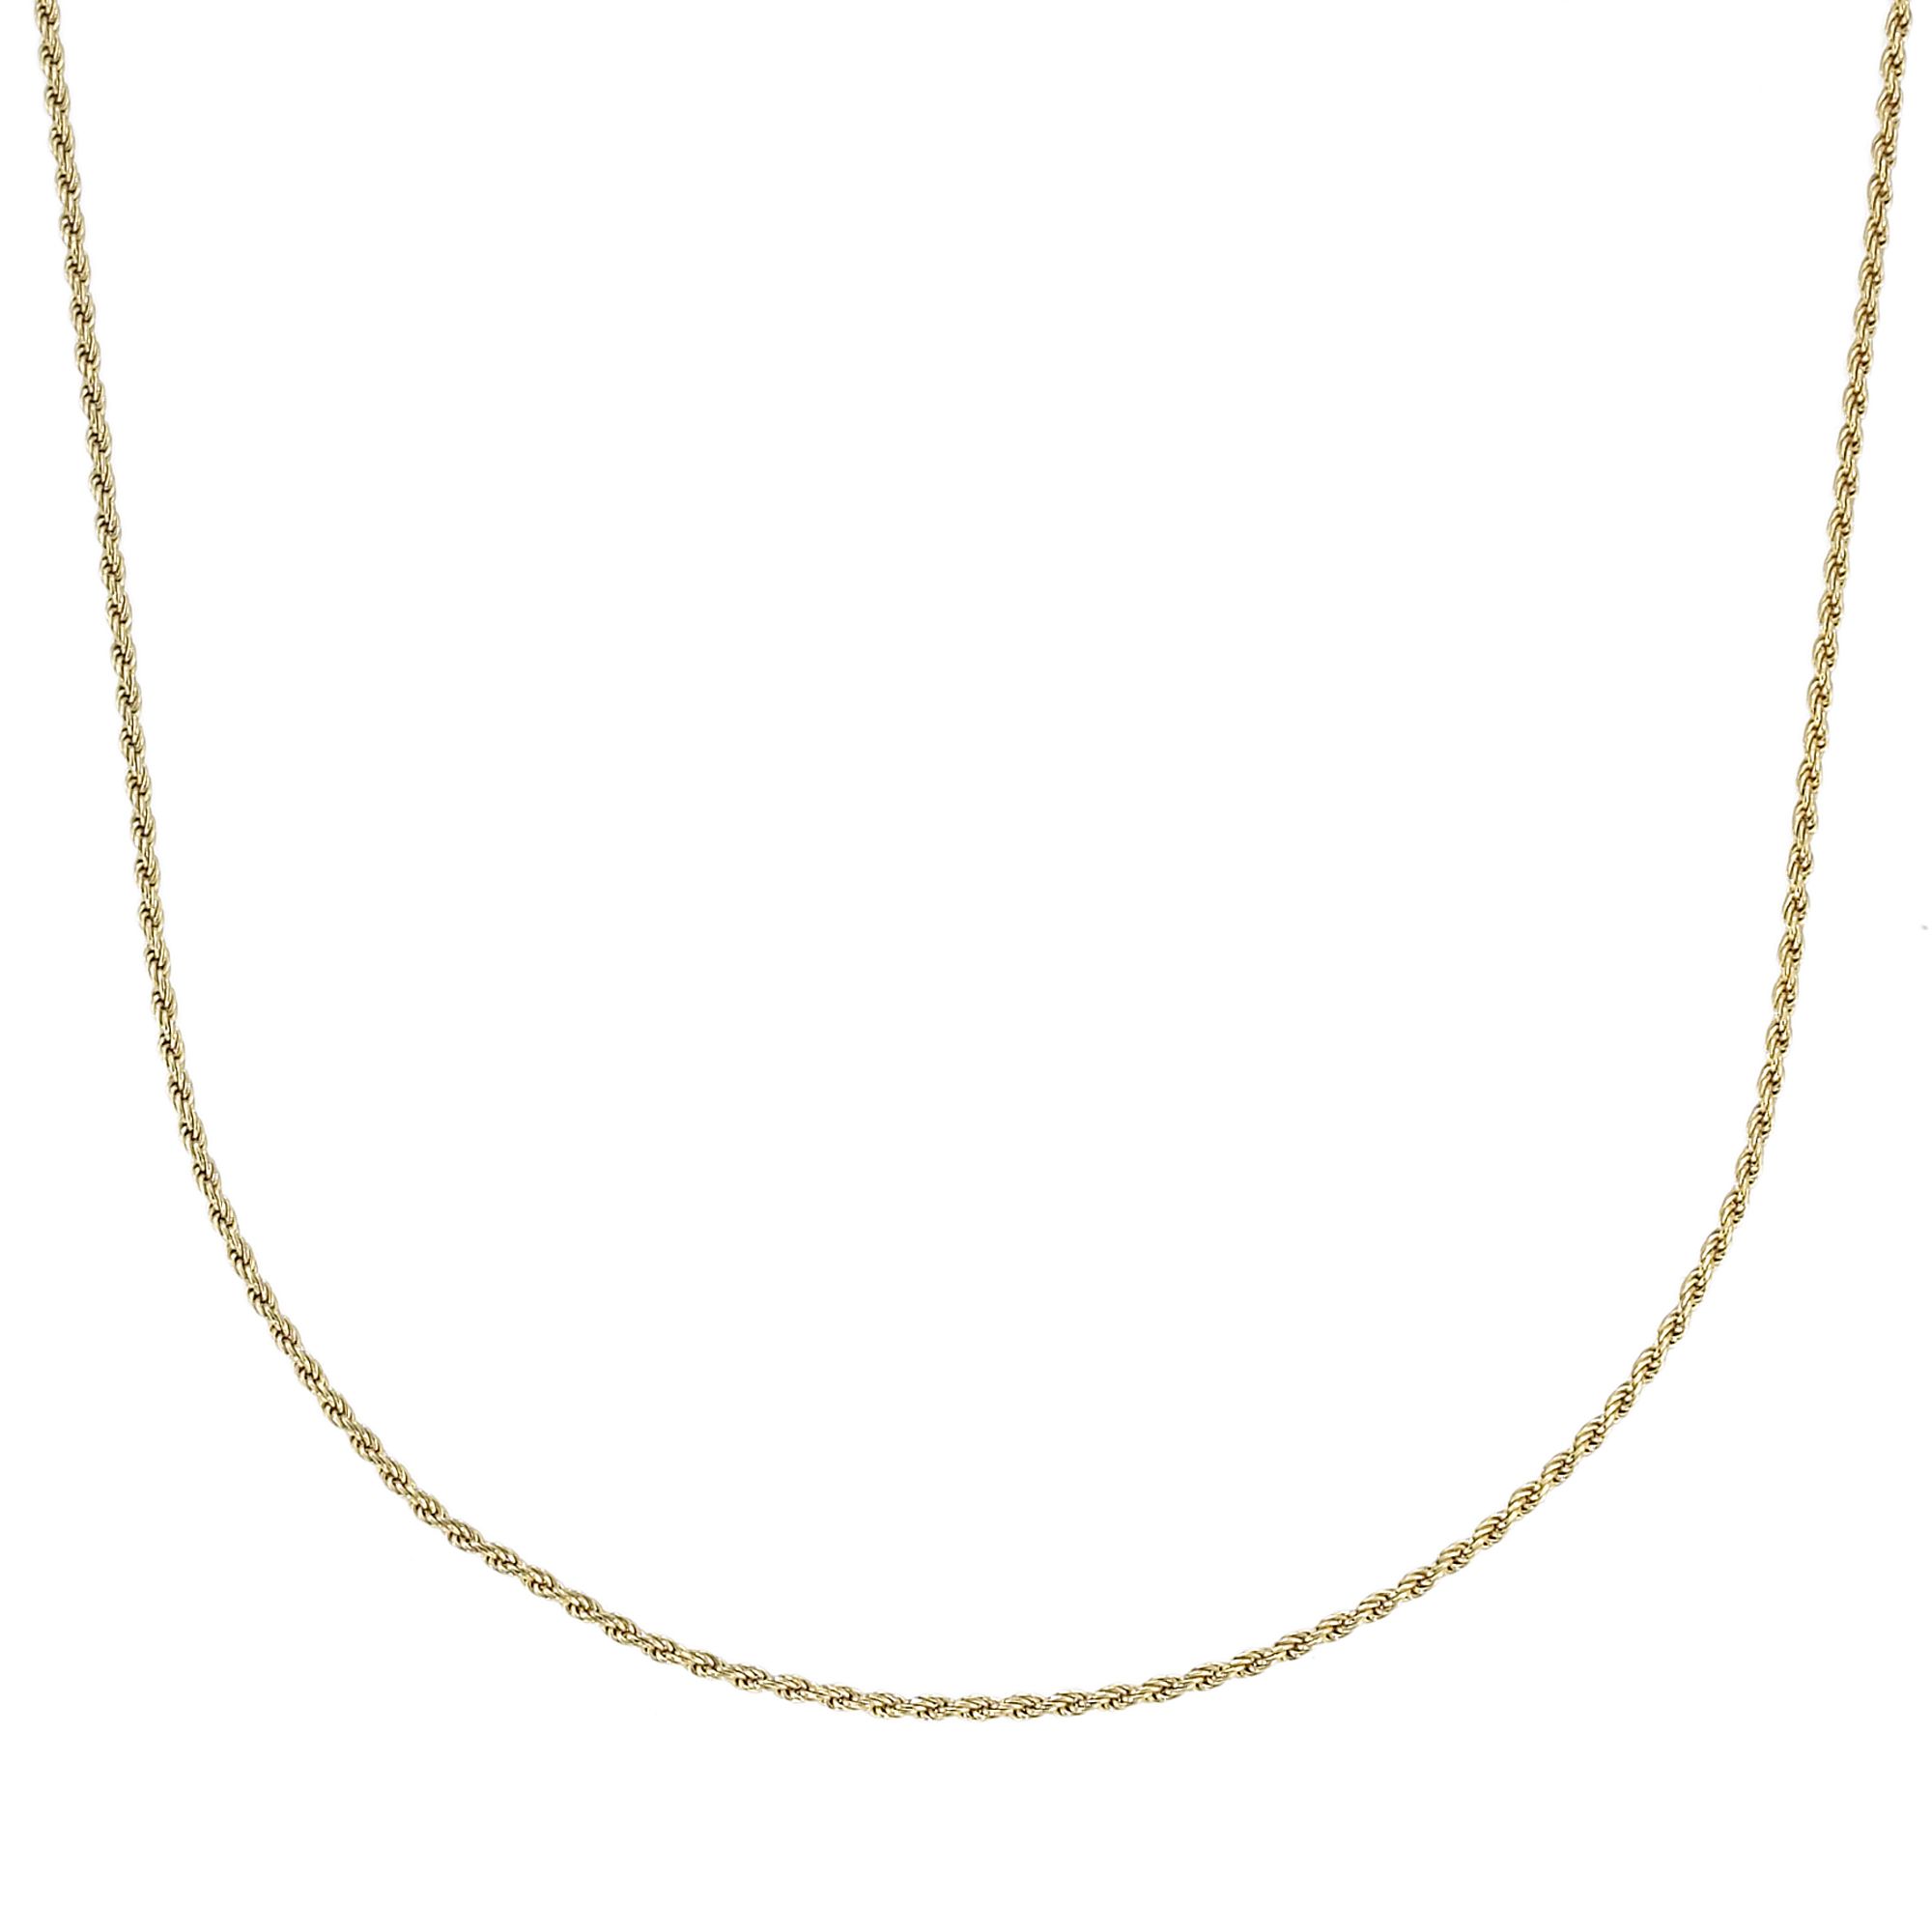 24k Gold over Sterling Silver Rope Necklace